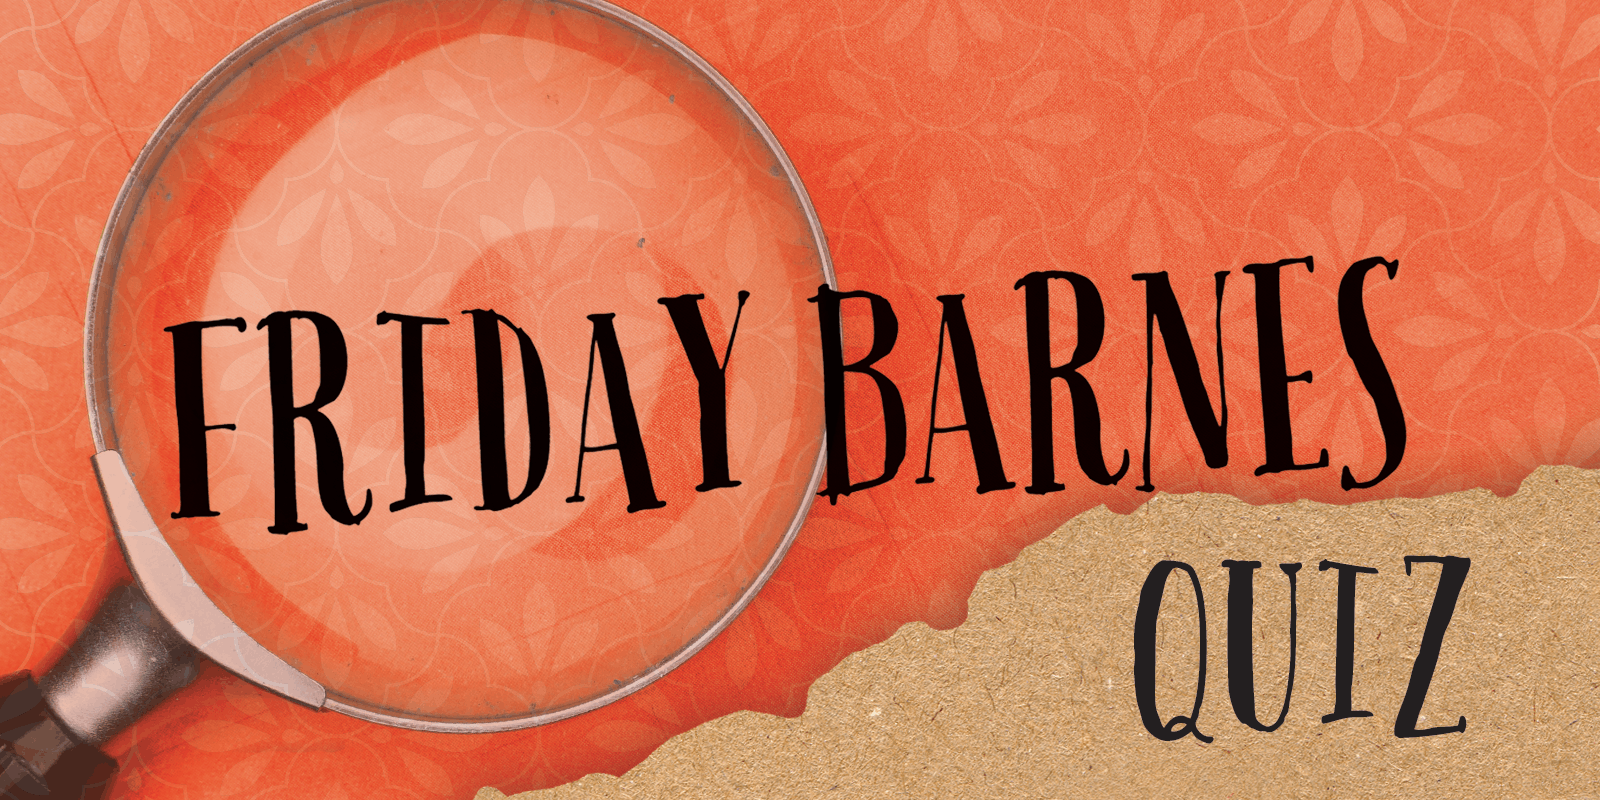 QUIZ: How well do you know Friday Barnes?